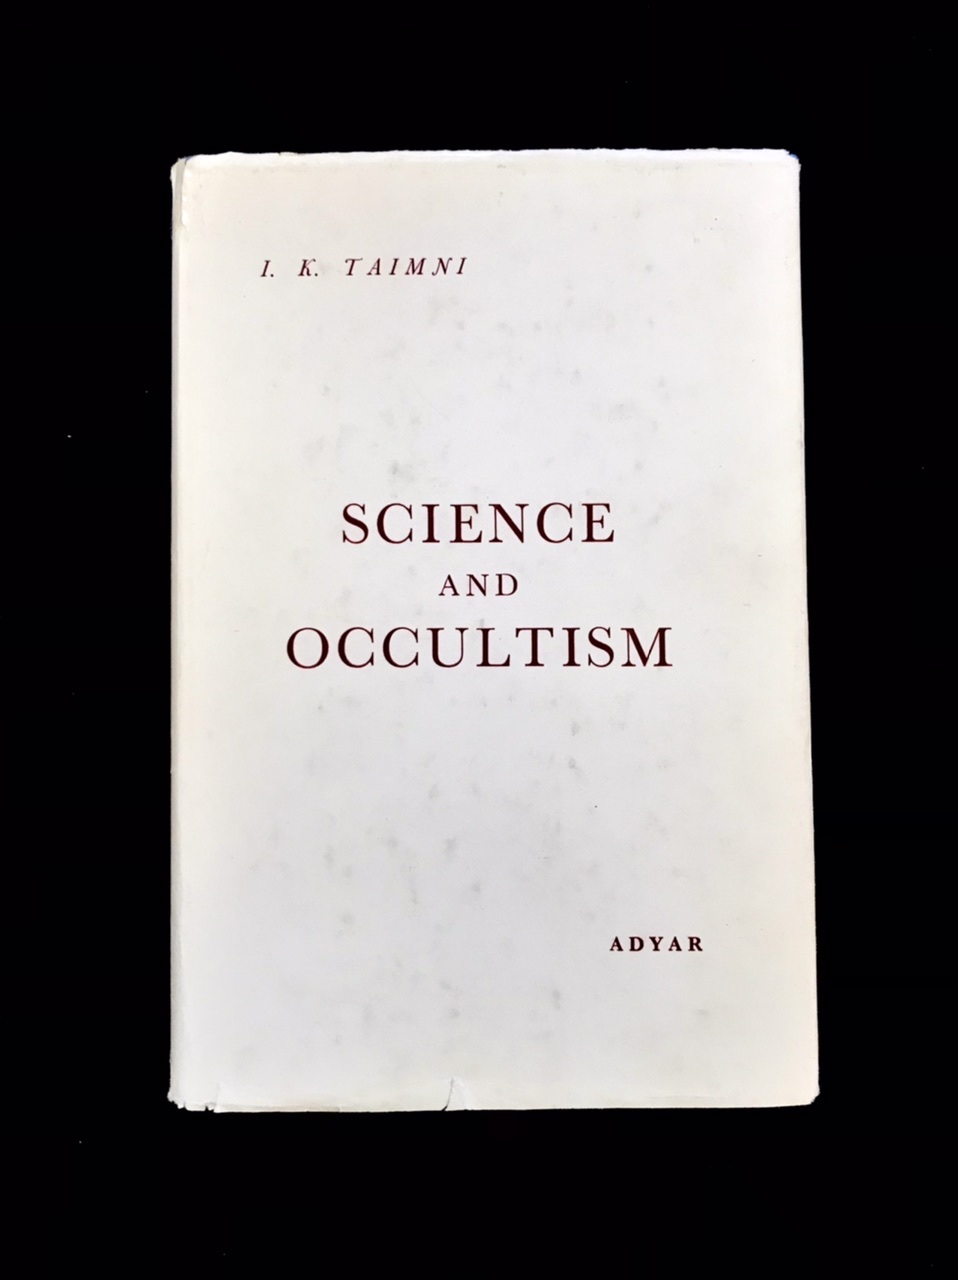 Science & Occultism by I. K. Taimni